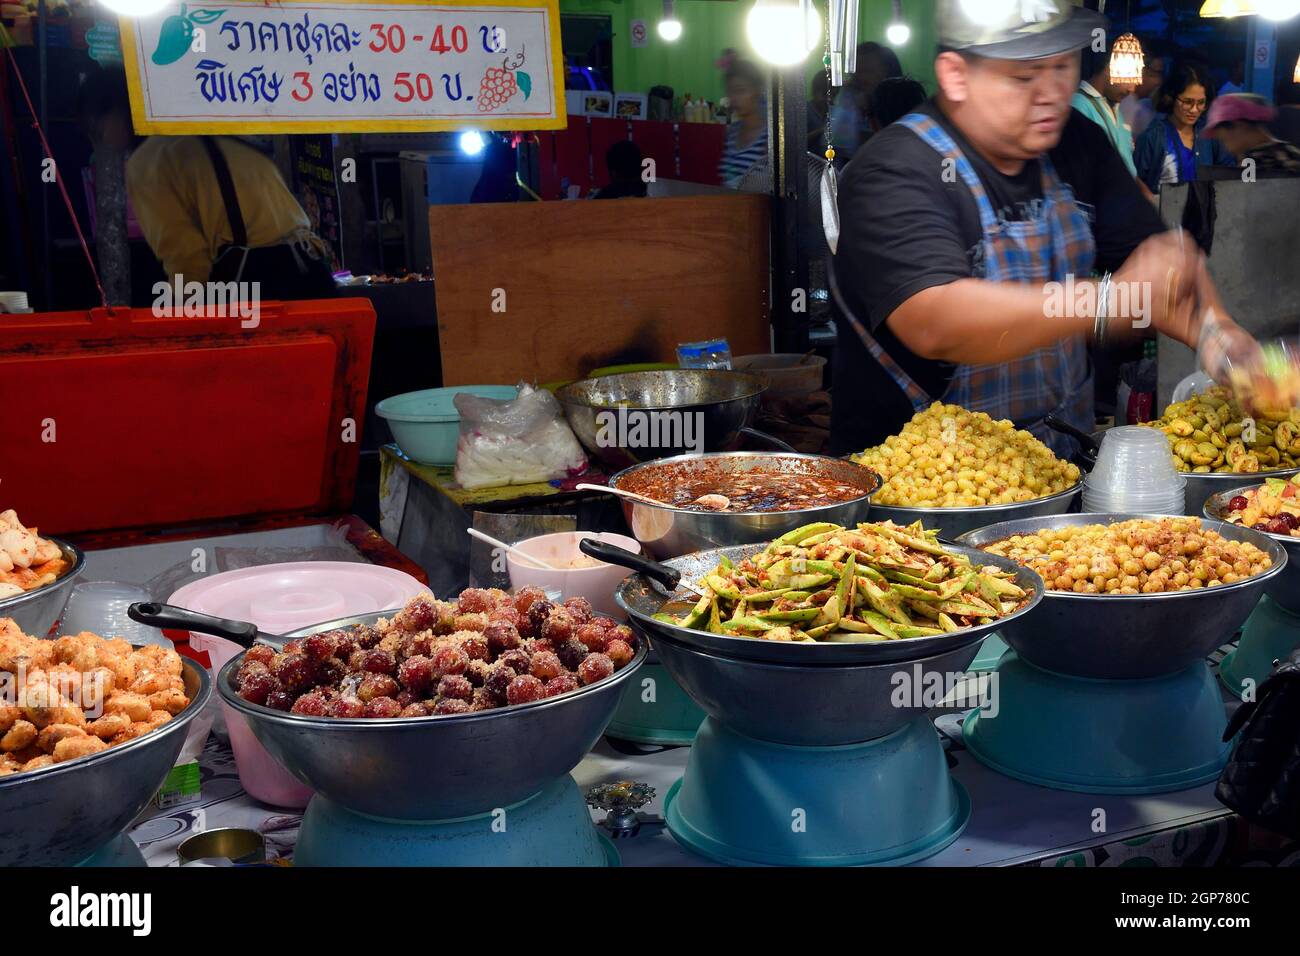 Food stand with typical dishes, Chillva Market, Phuket, Thailand Stock Photo